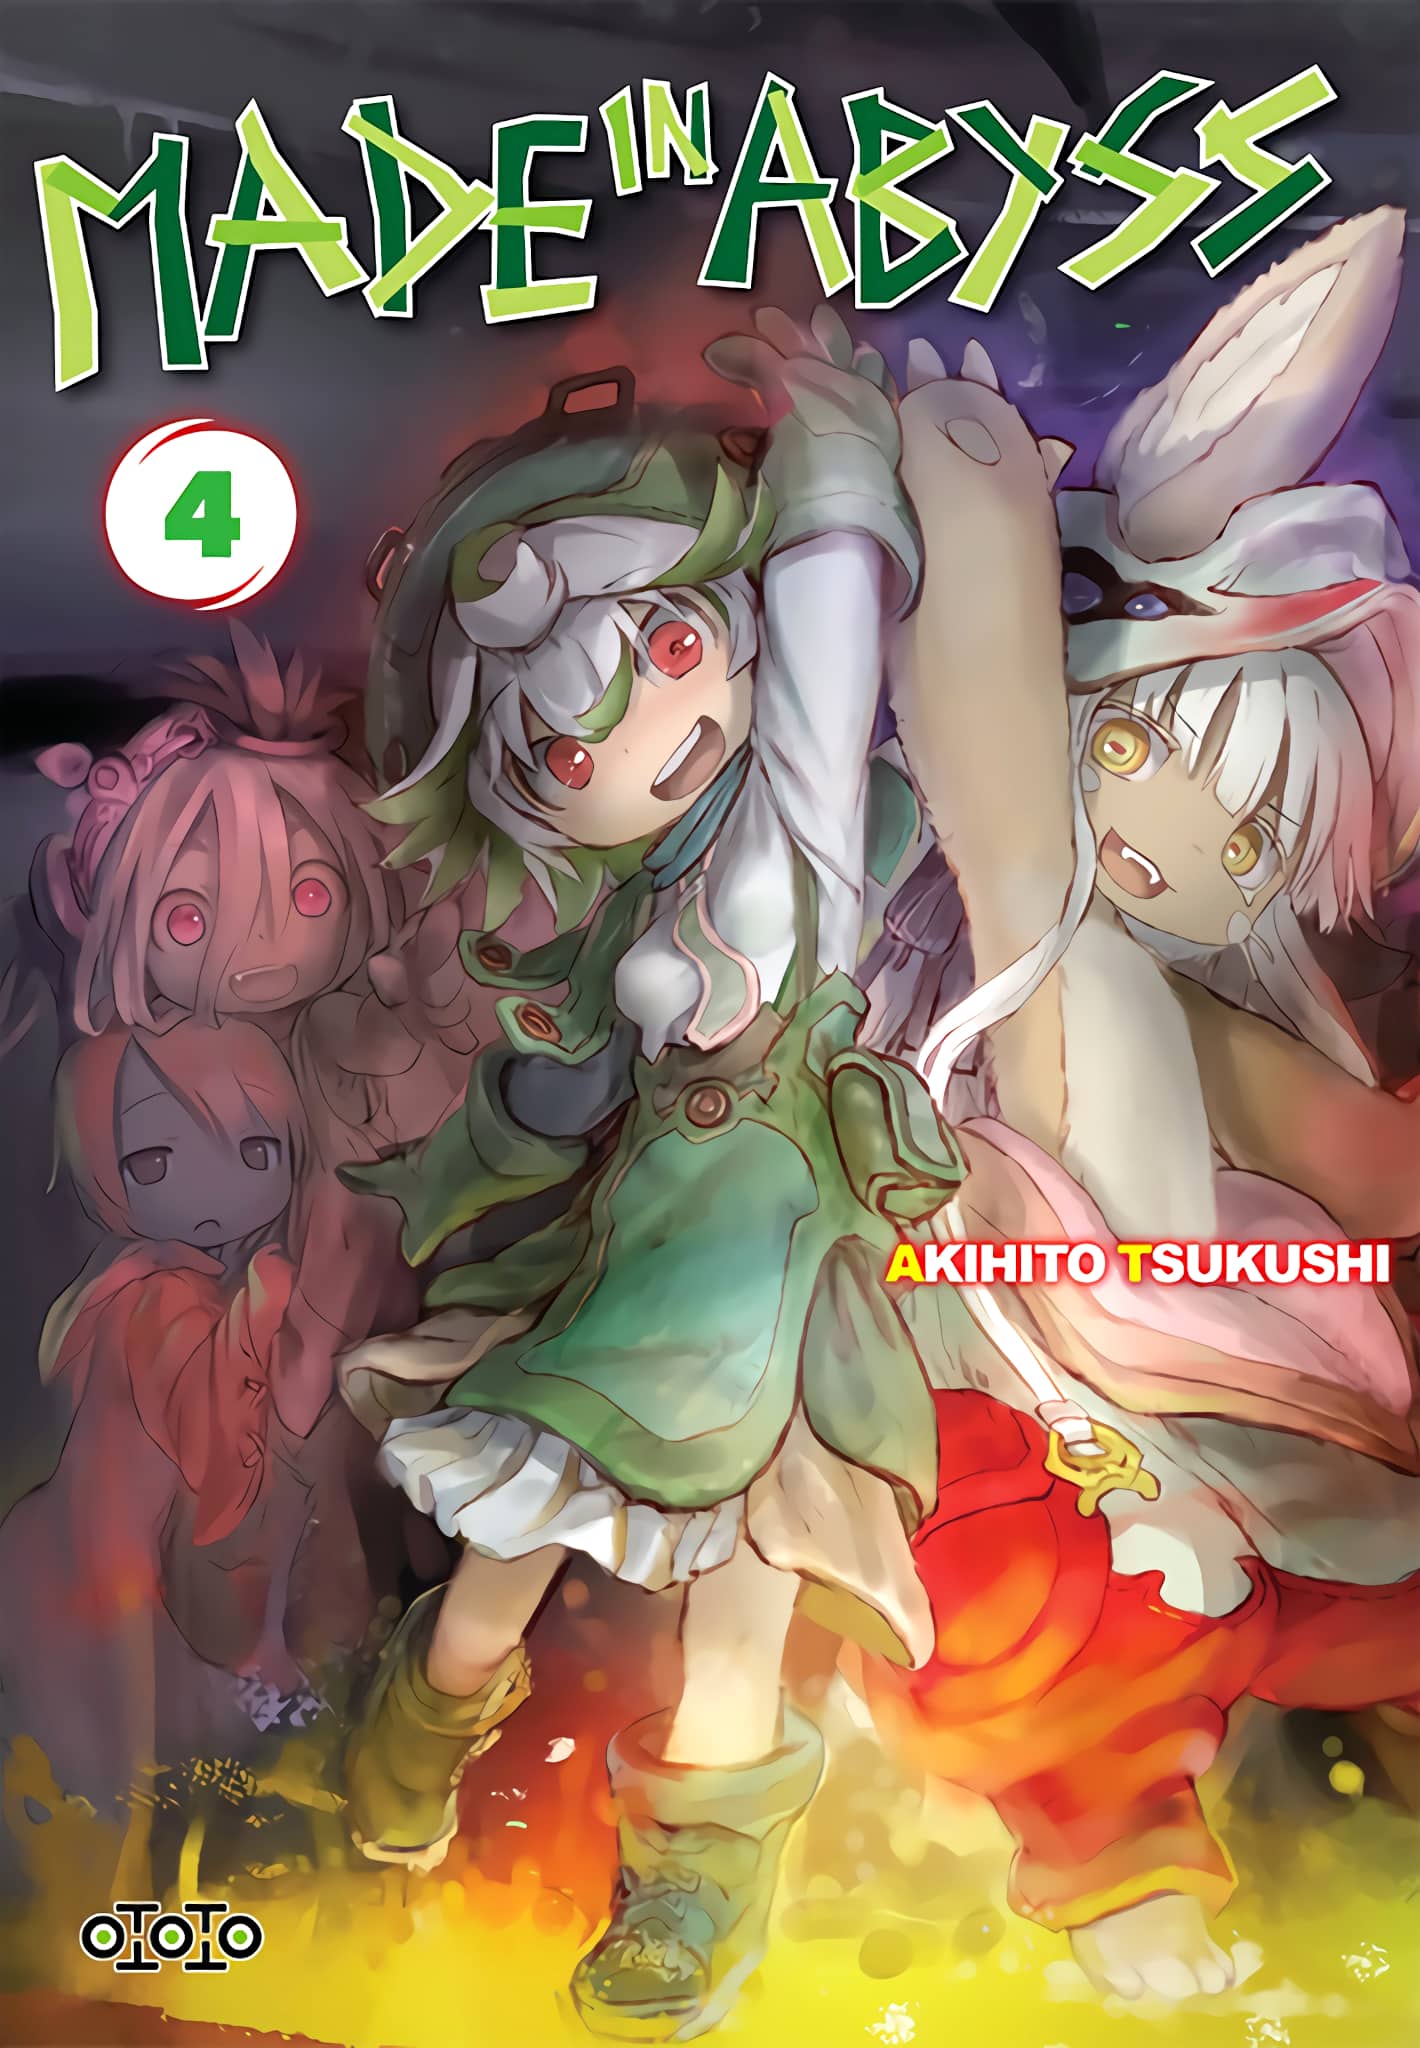 Tome 4 du manga Made in Abyss